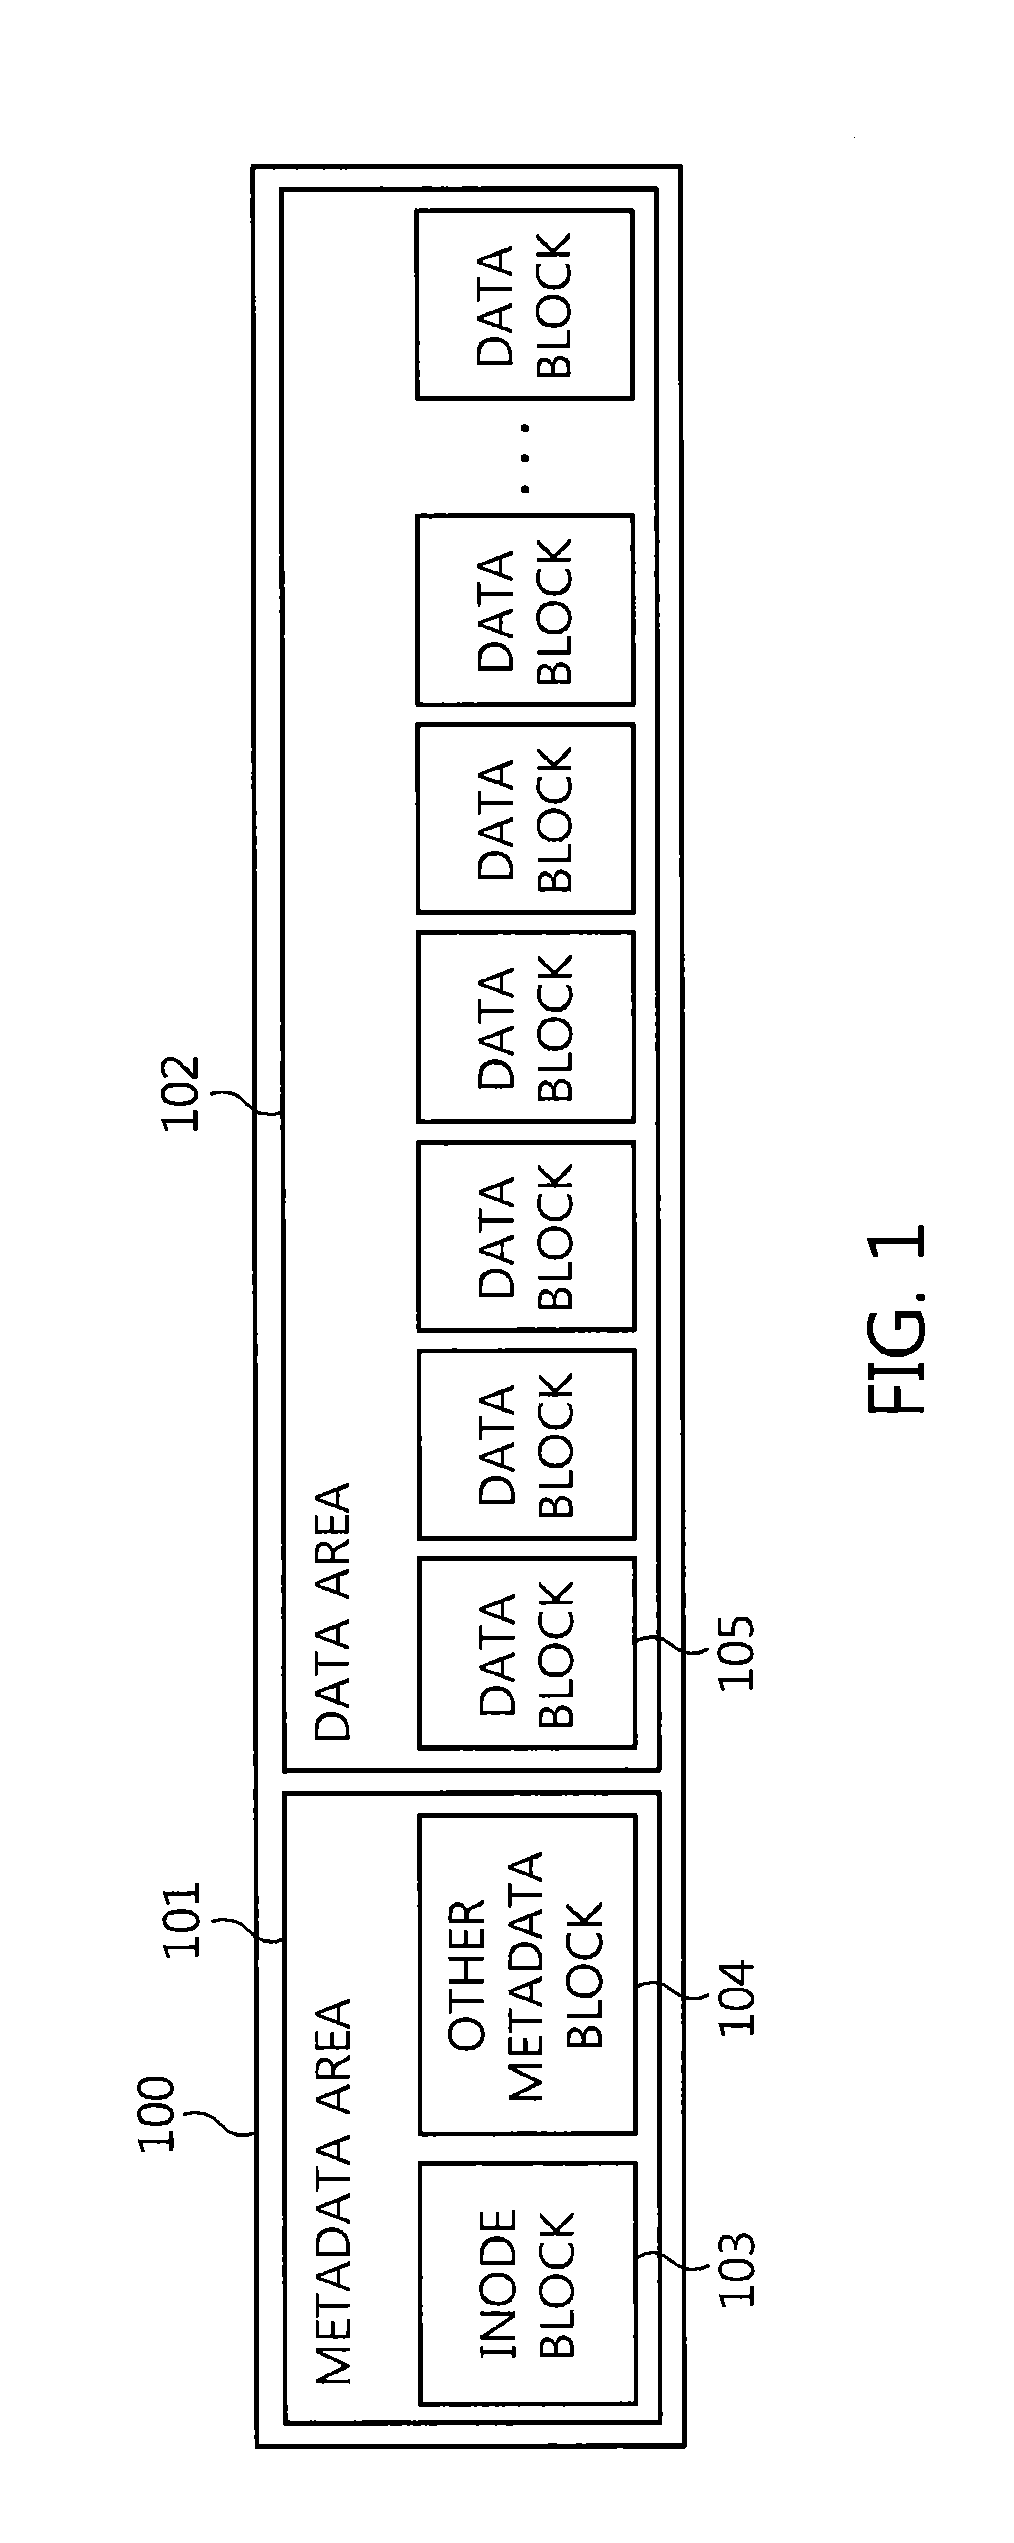 Data update apparatus and method for flash memory file system